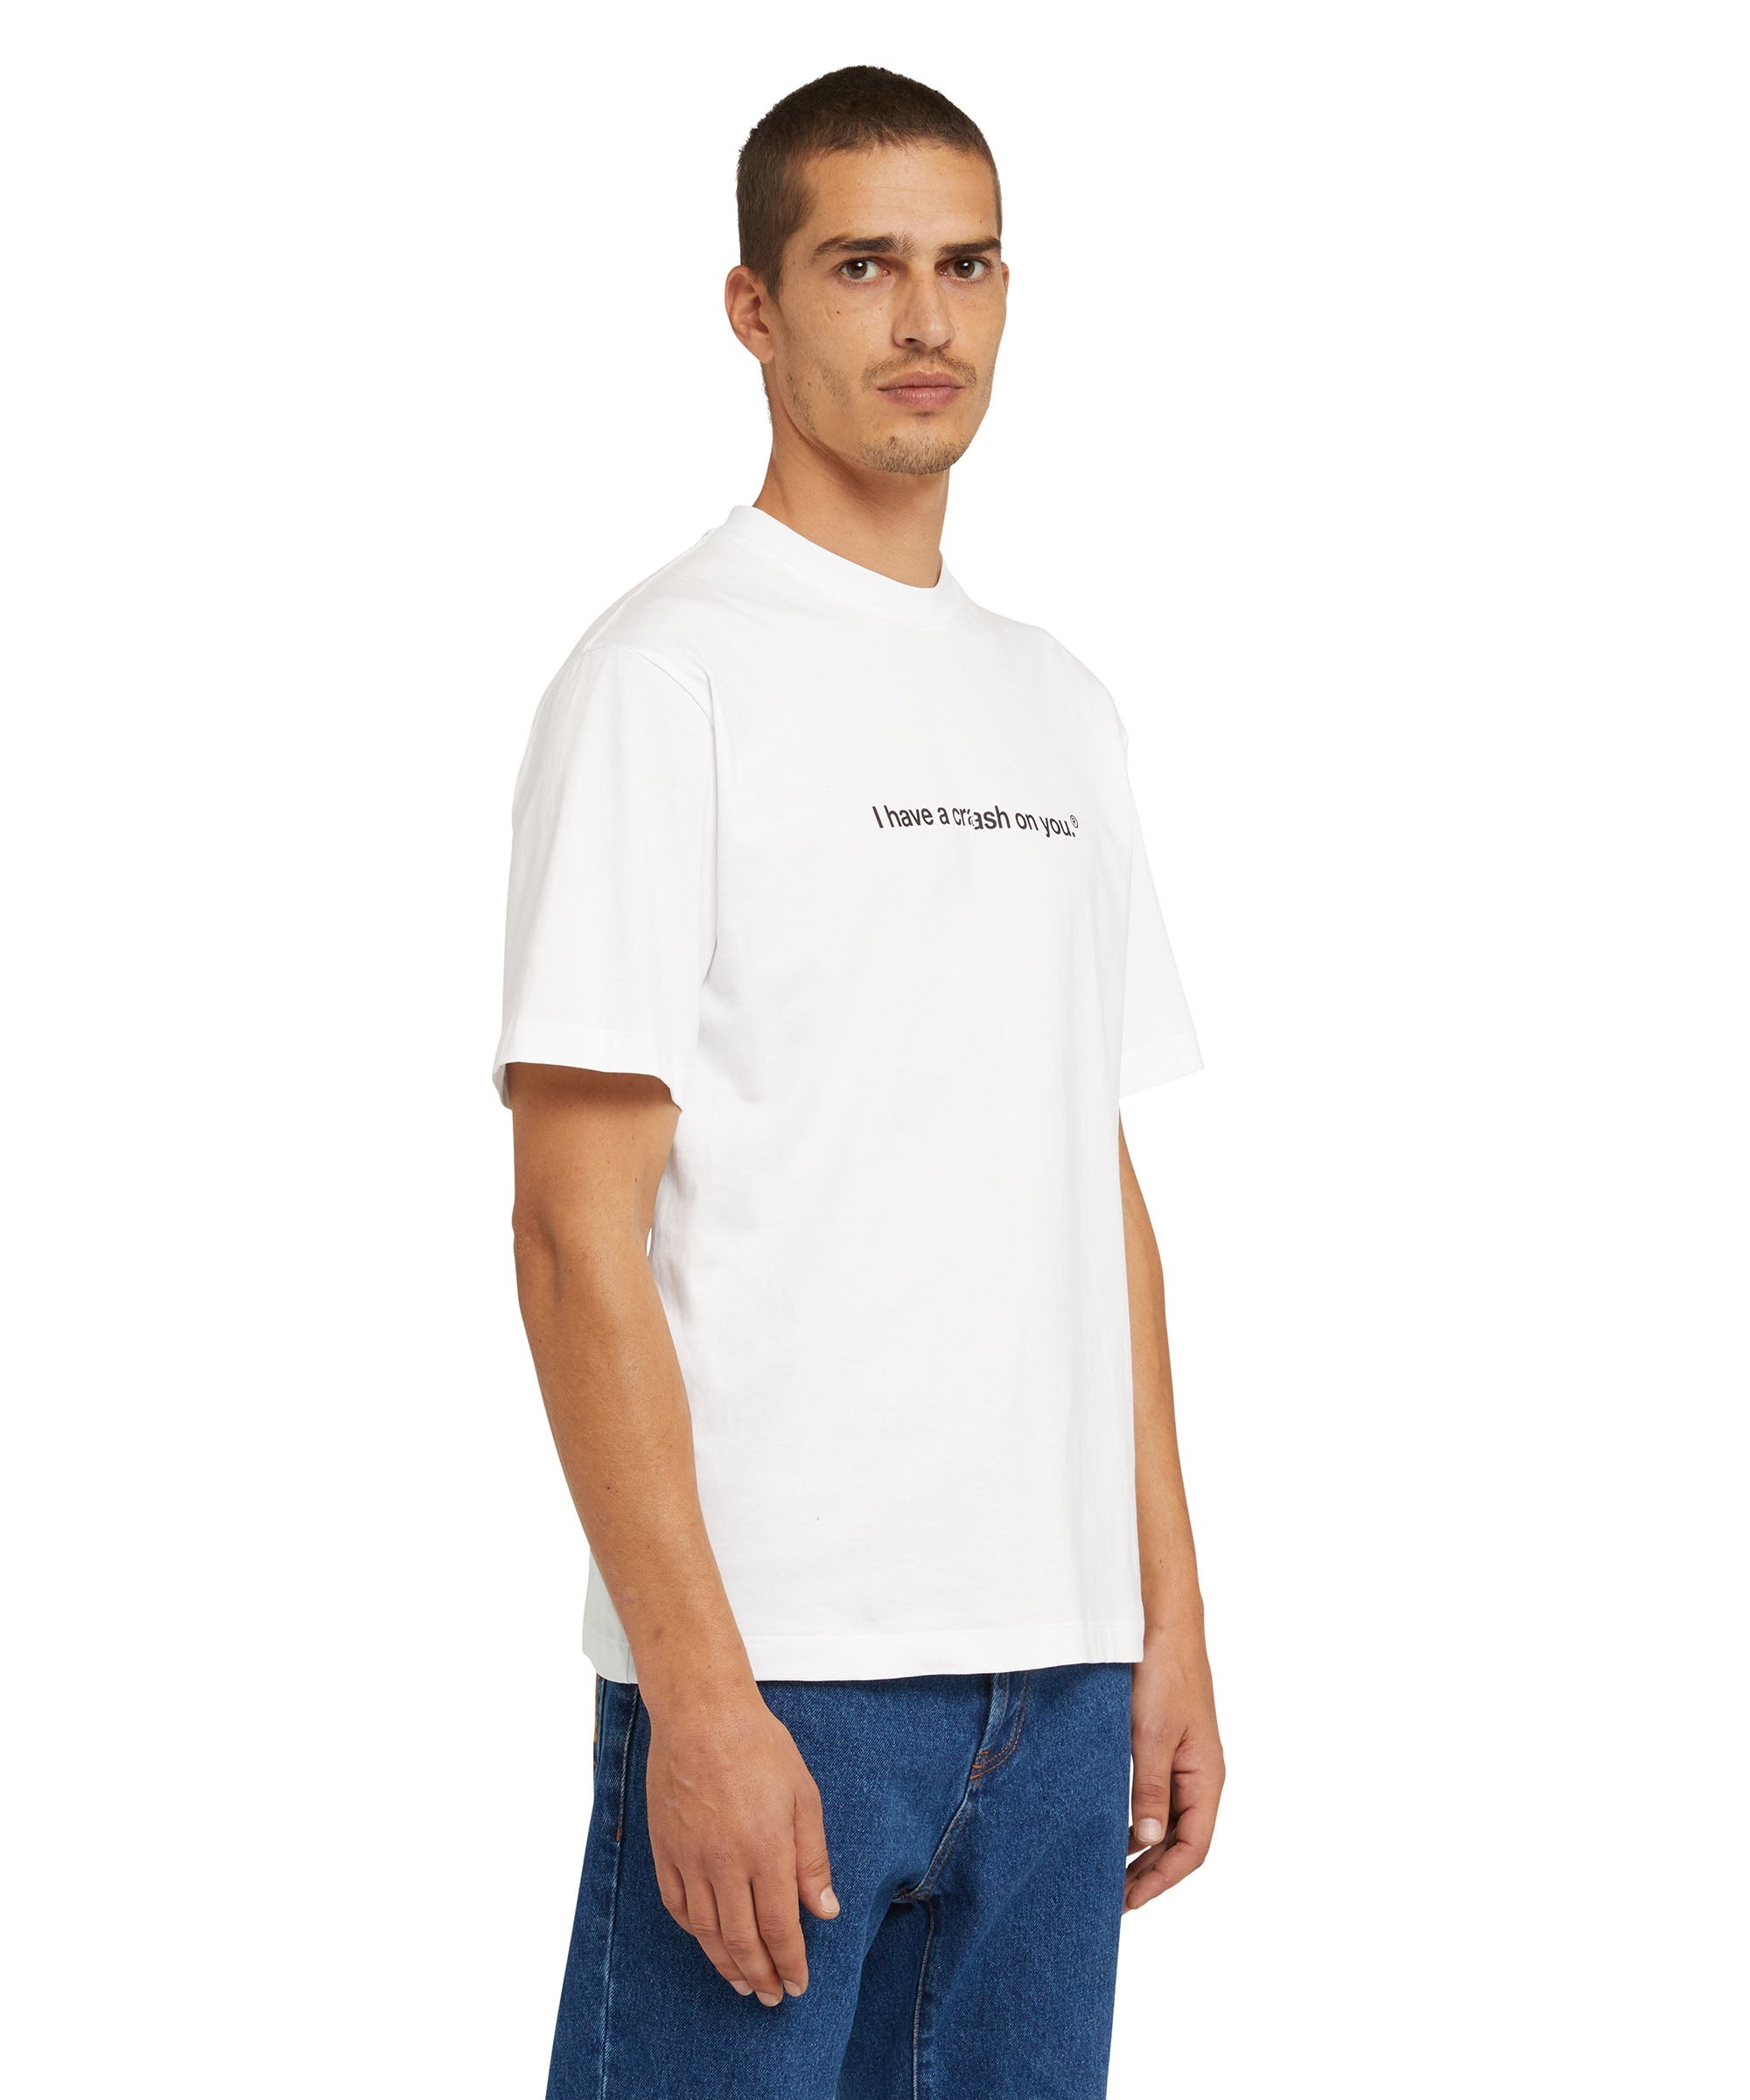 Cotton T-shirt with Crash quote - 4